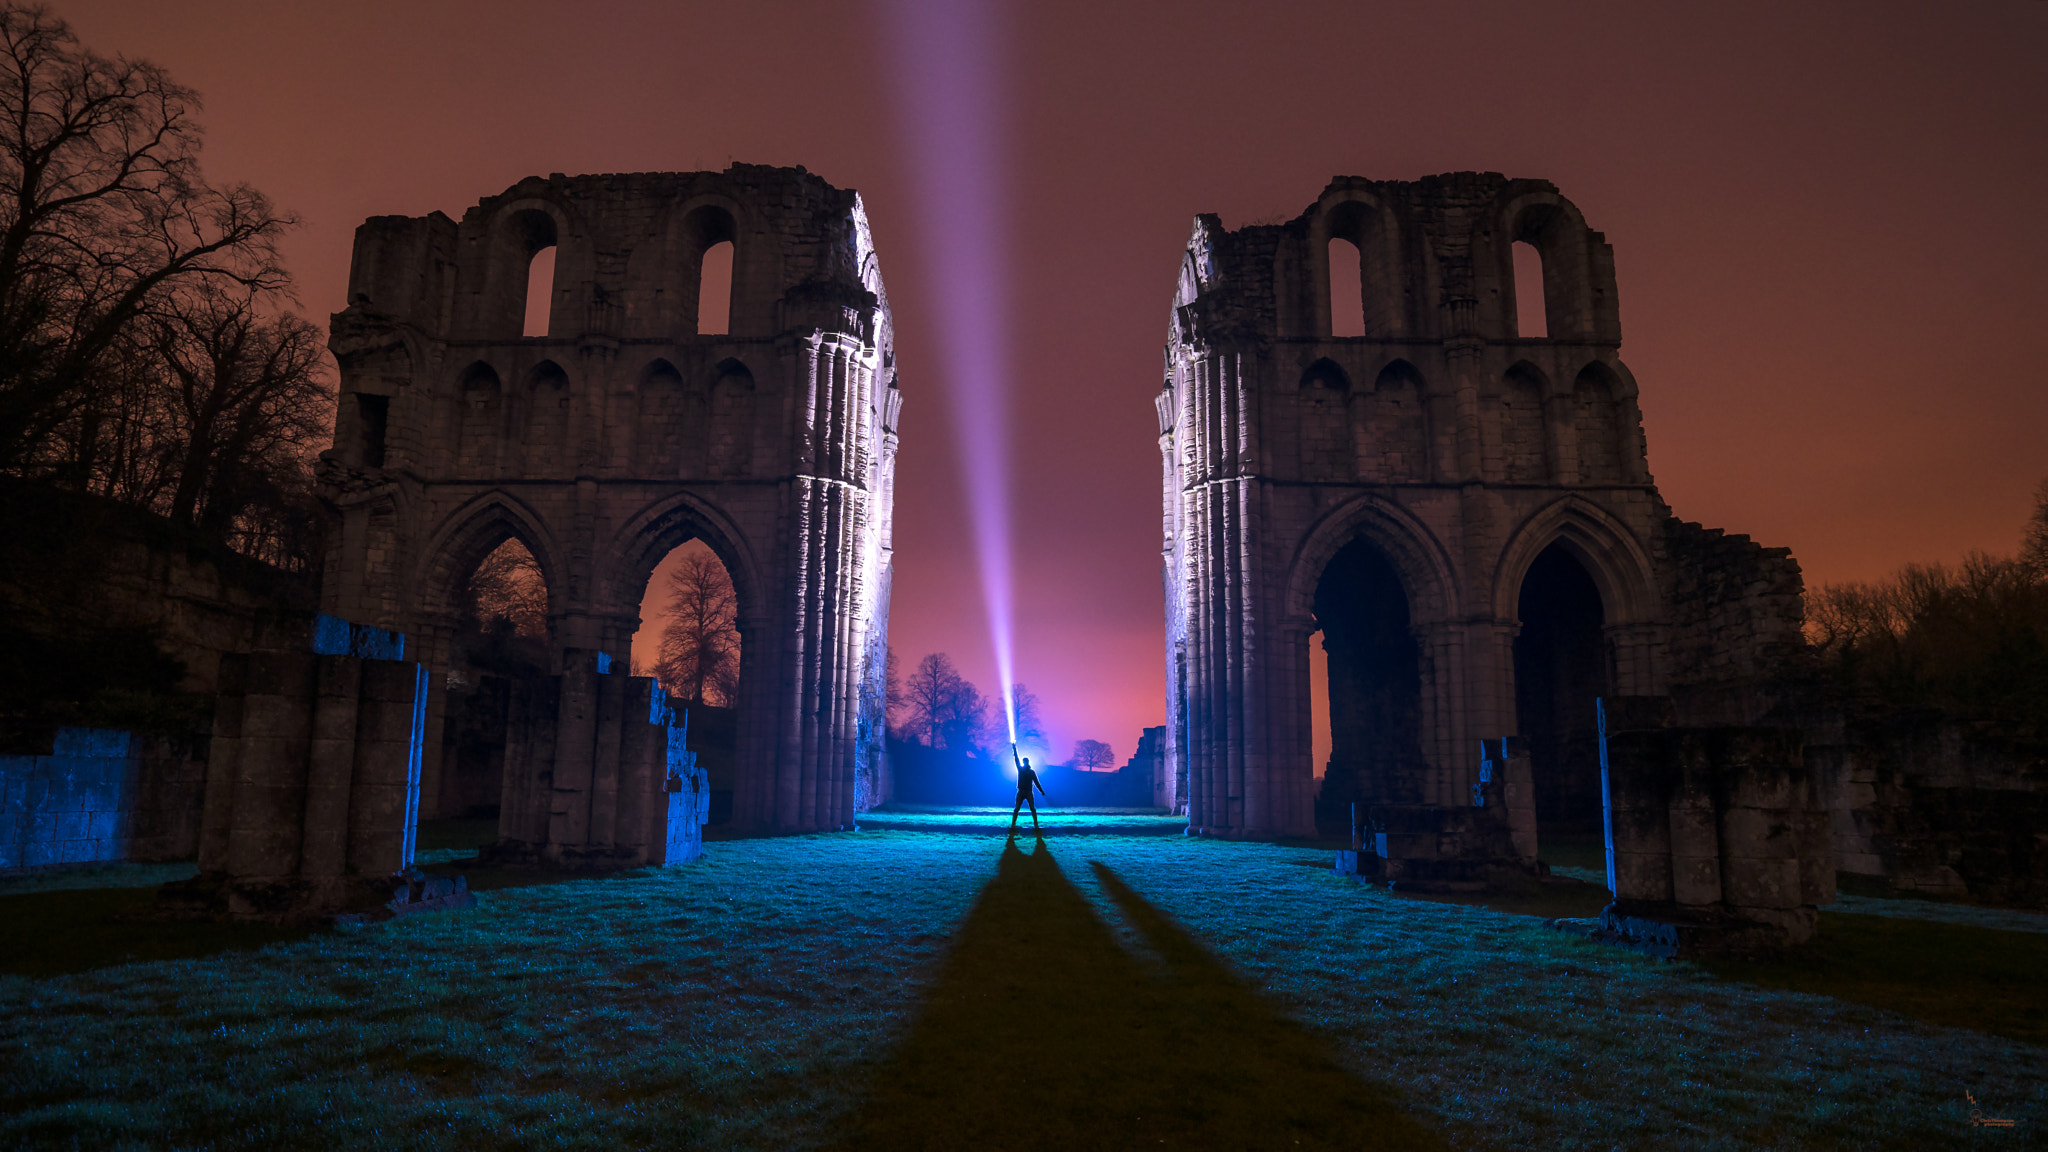 Sony a7 sample photo. Lighting up roche abbey photography